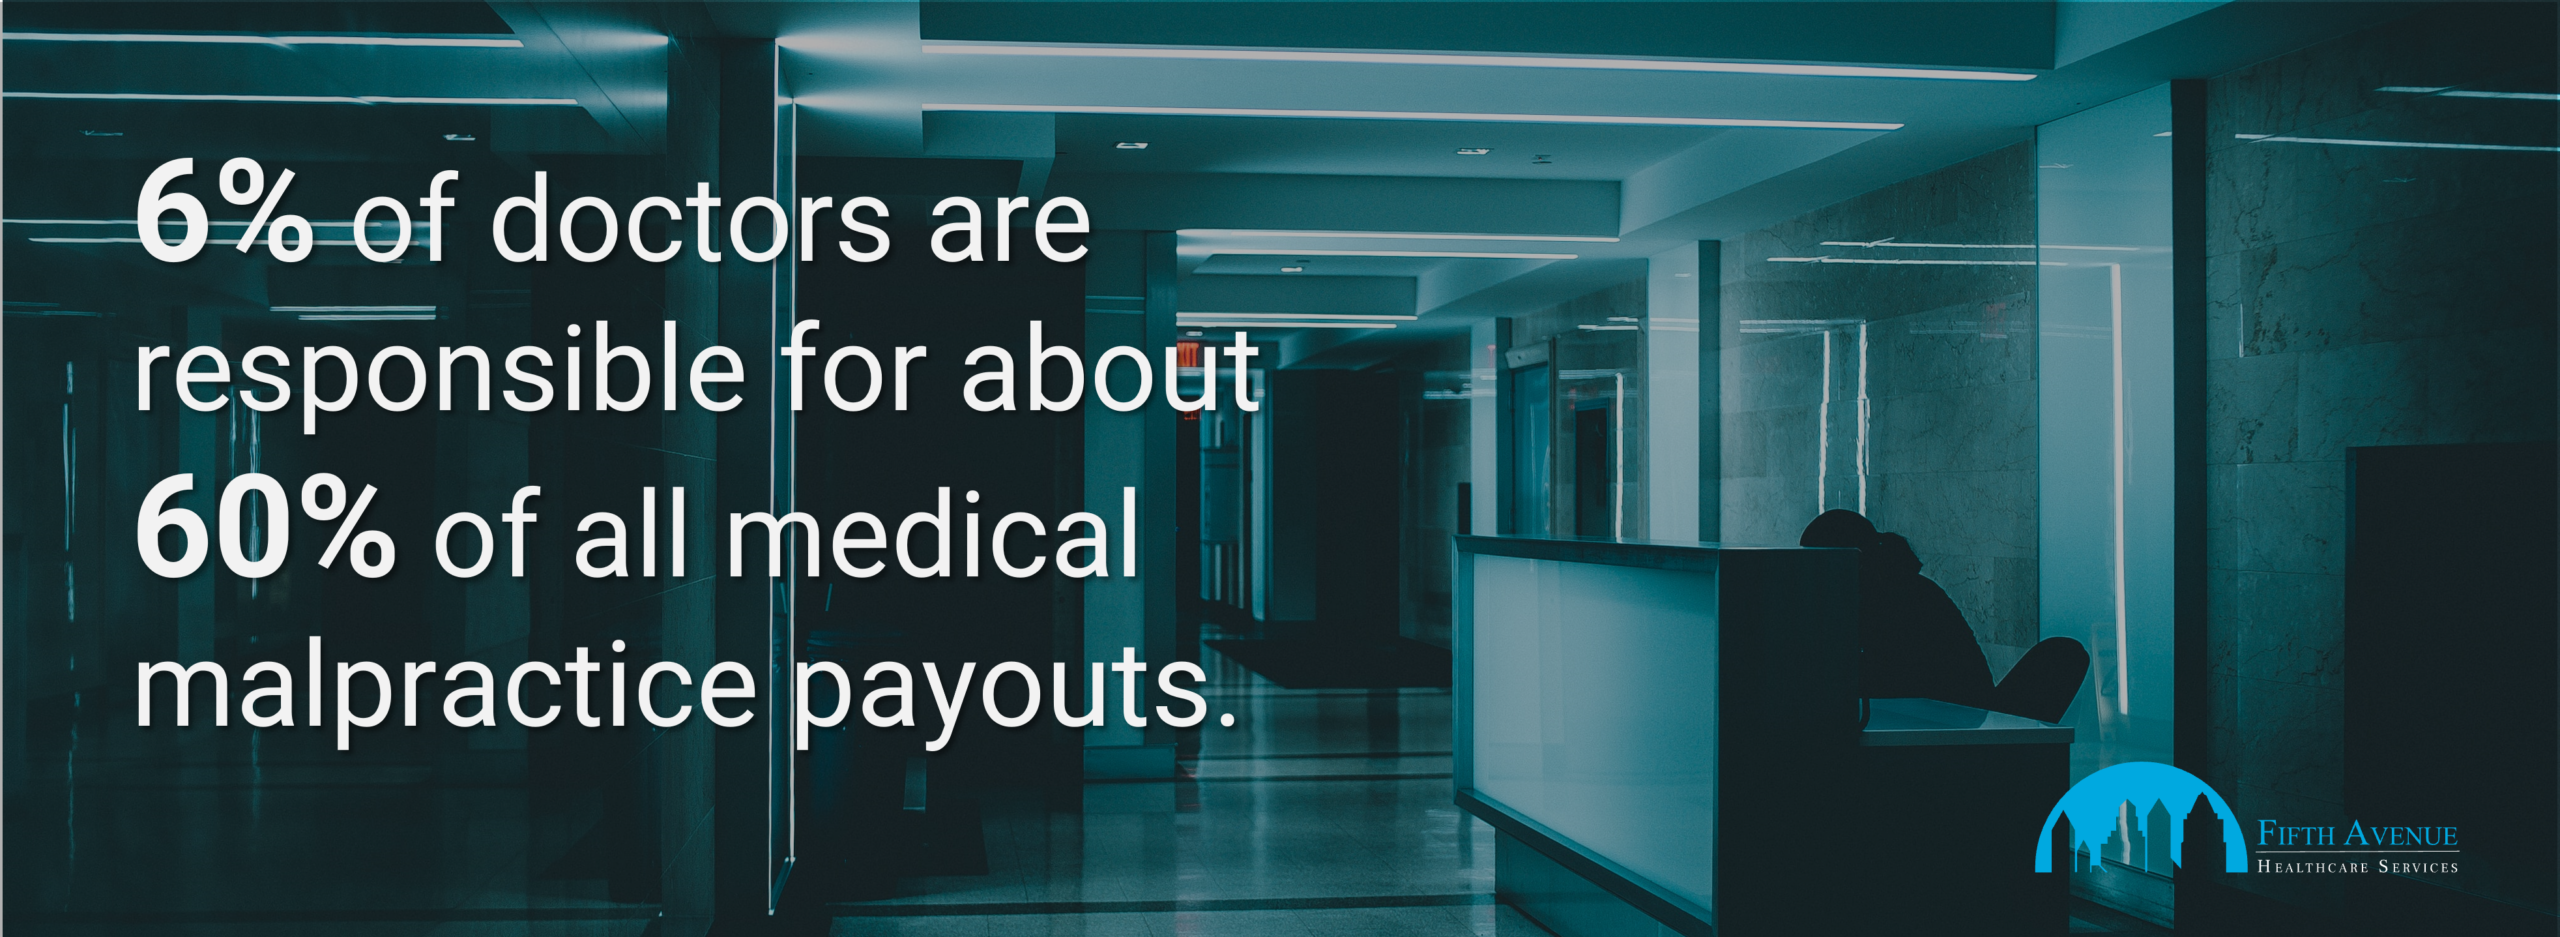 6% of Doctors Responsible for 60% of all Medical Malpractice Payouts